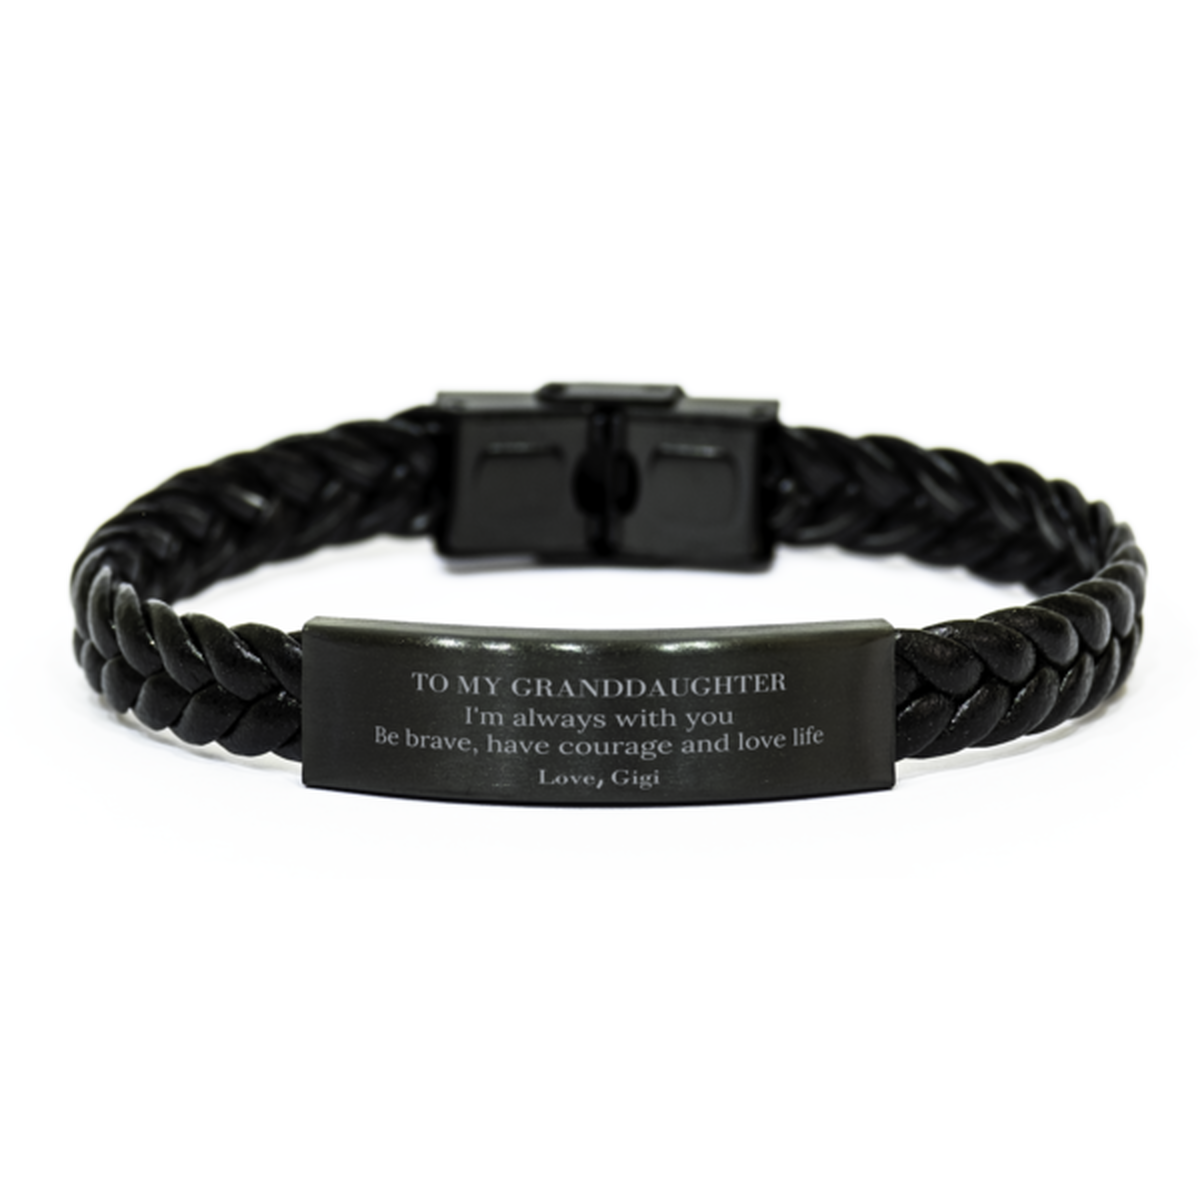 To My Granddaughter Gifts from Gigi, Unique Braided Leather Bracelet Inspirational Christmas Birthday Graduation Gifts for Granddaughter I'm always with you. Be brave, have courage and love life. Love, Gigi